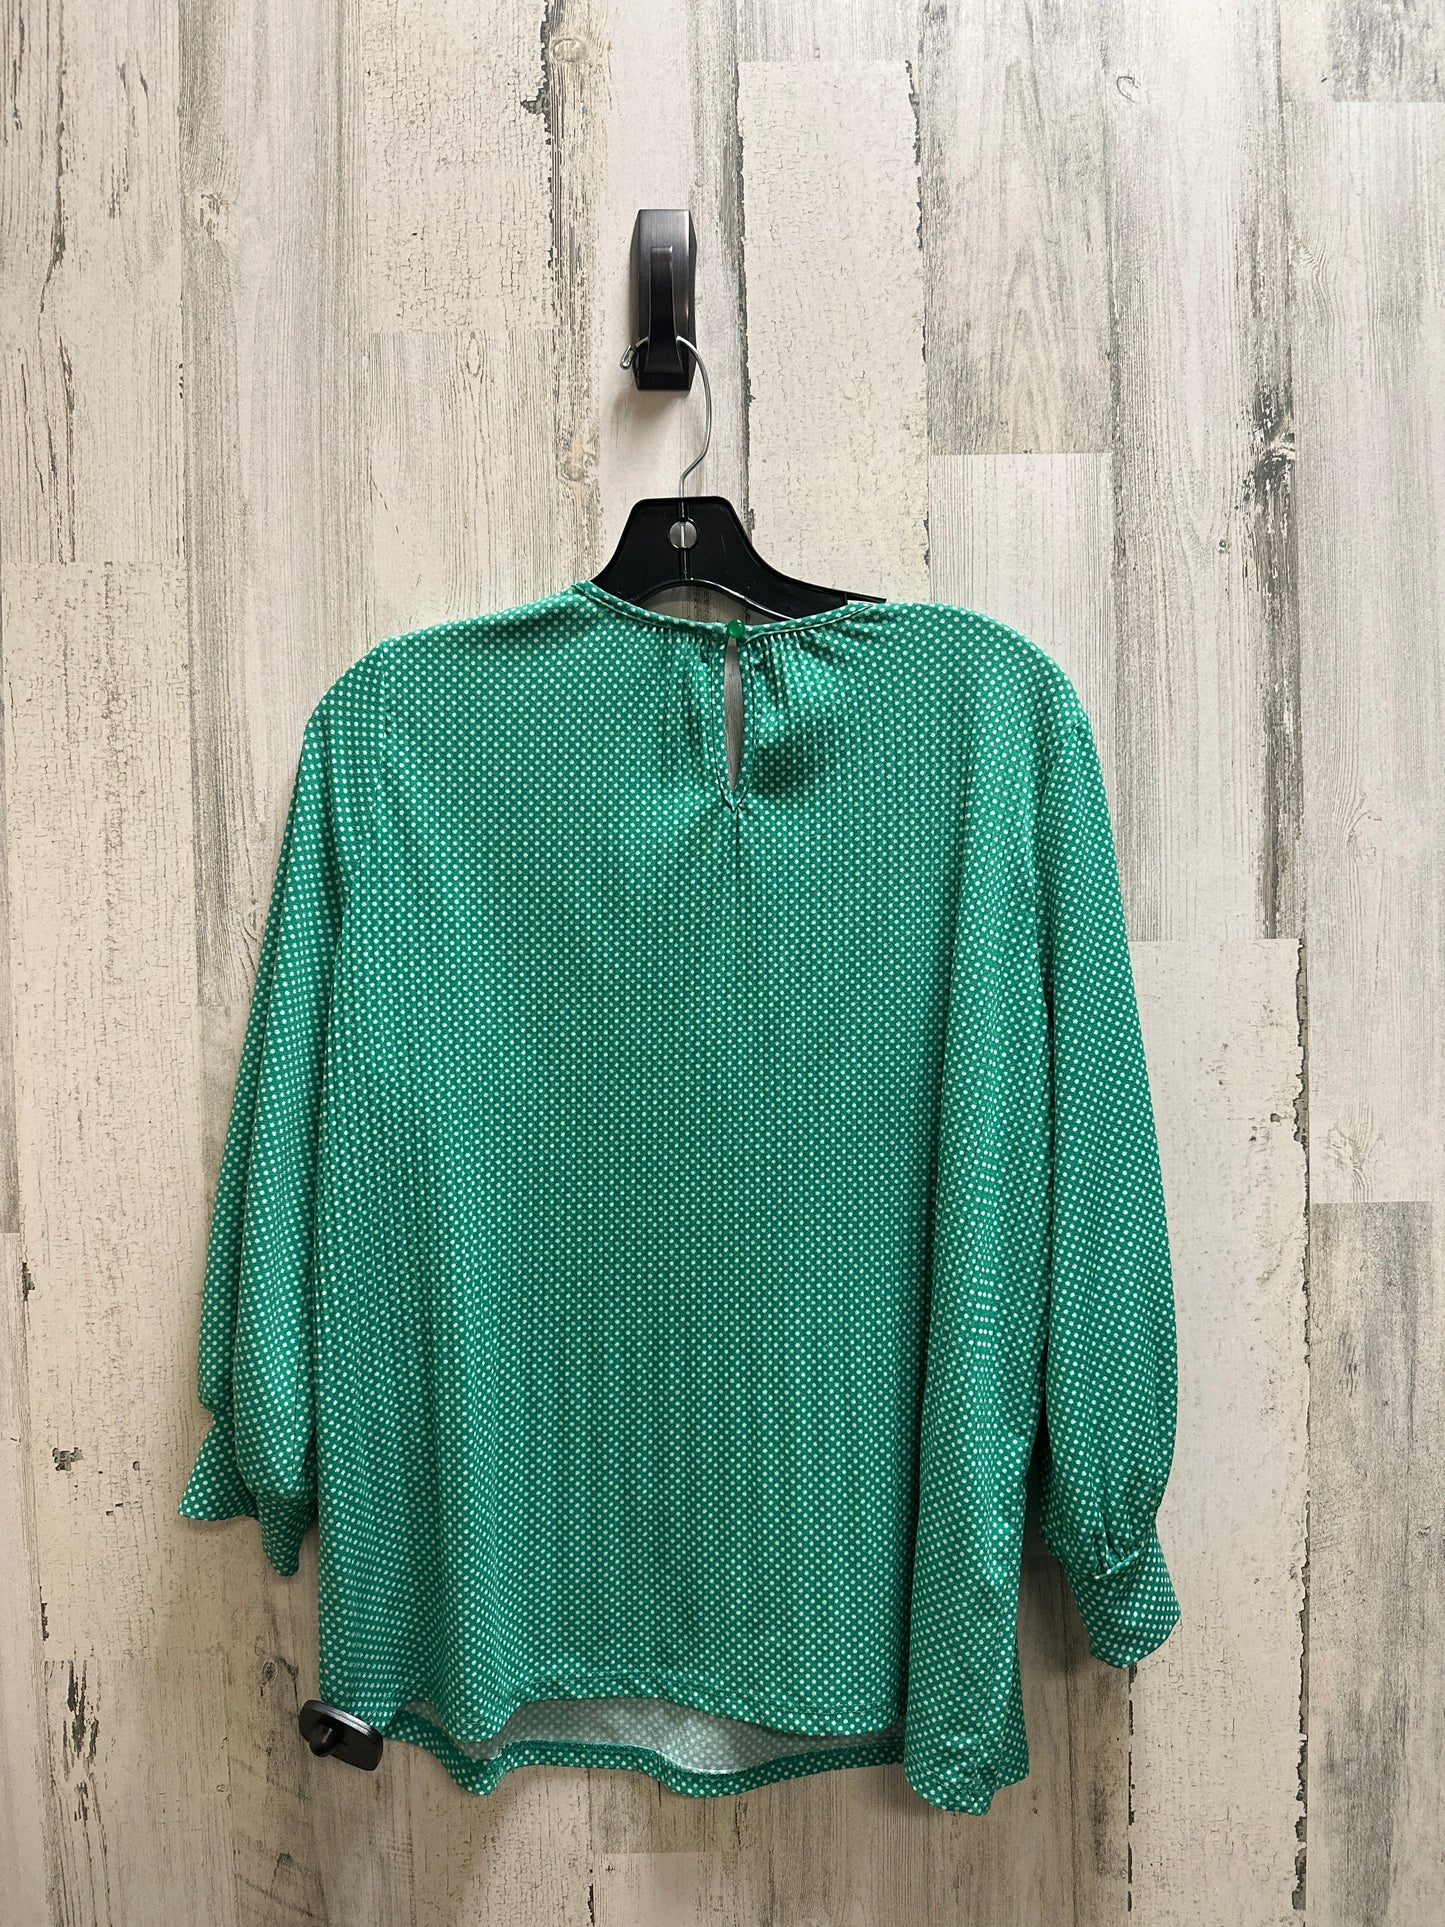 Top Long Sleeve By Adrianna Papell  Size: S